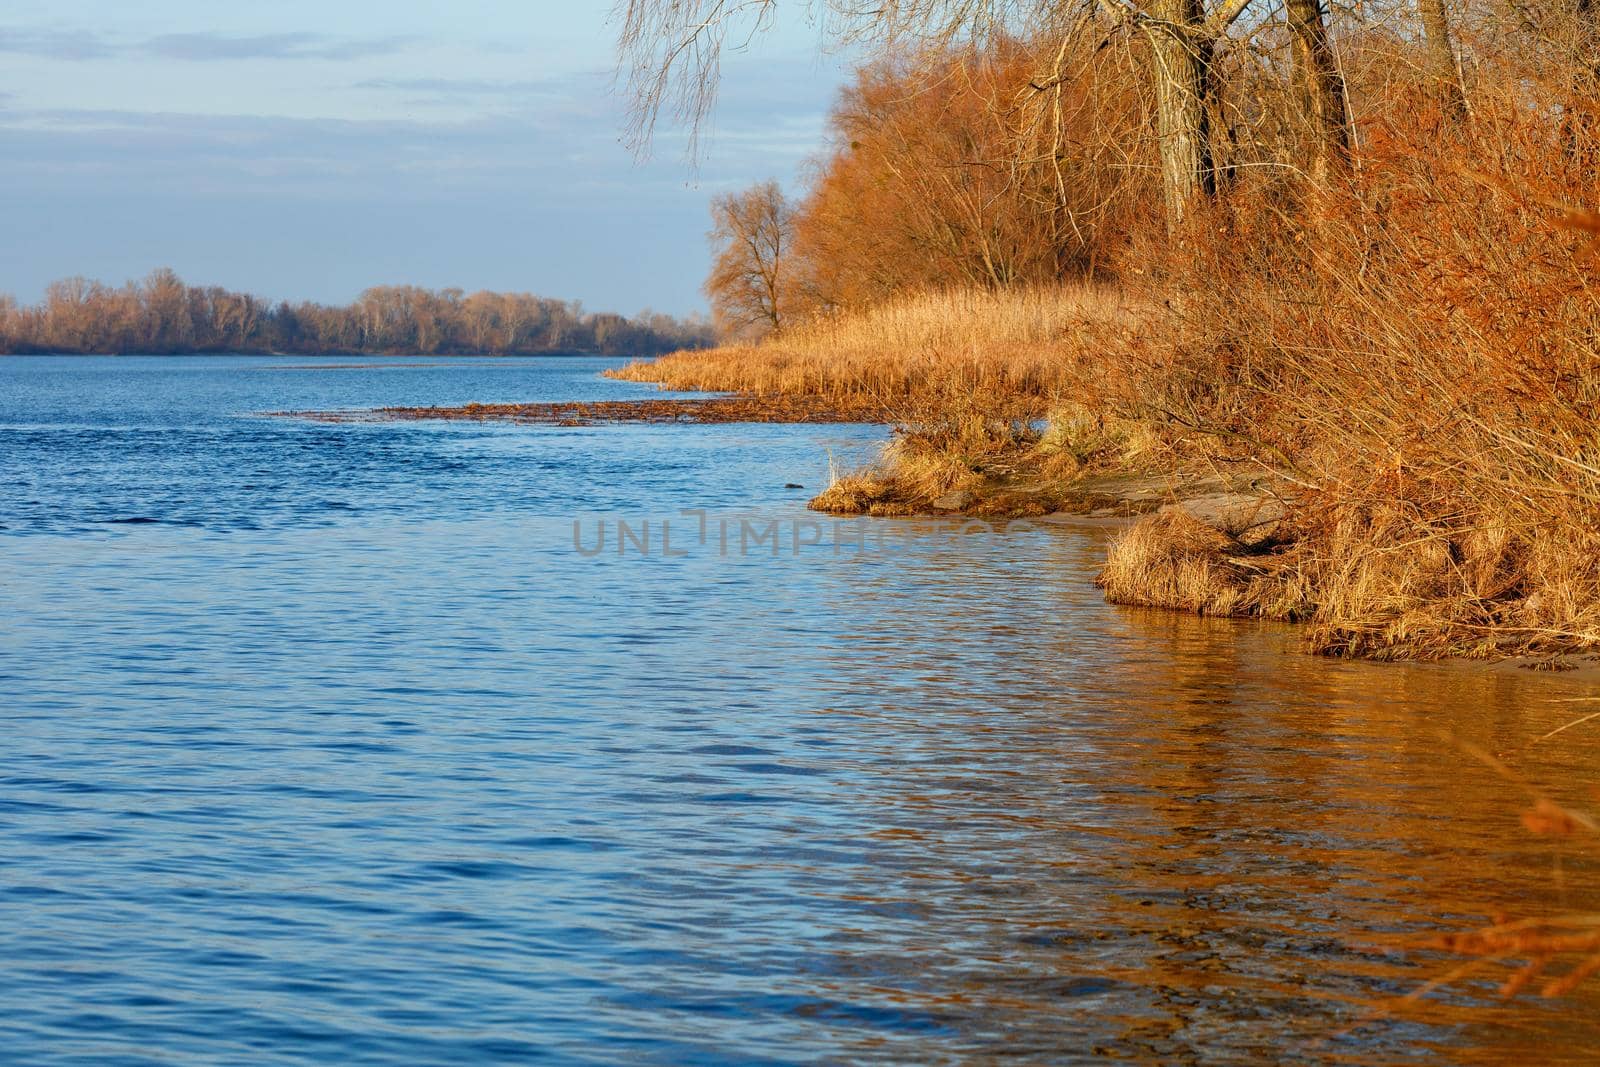 The bank of the Dnipro River with bare autumn bushes without leaves and brown dry thickets of reeds in the water is illuminated by the rays of the autumn sun.